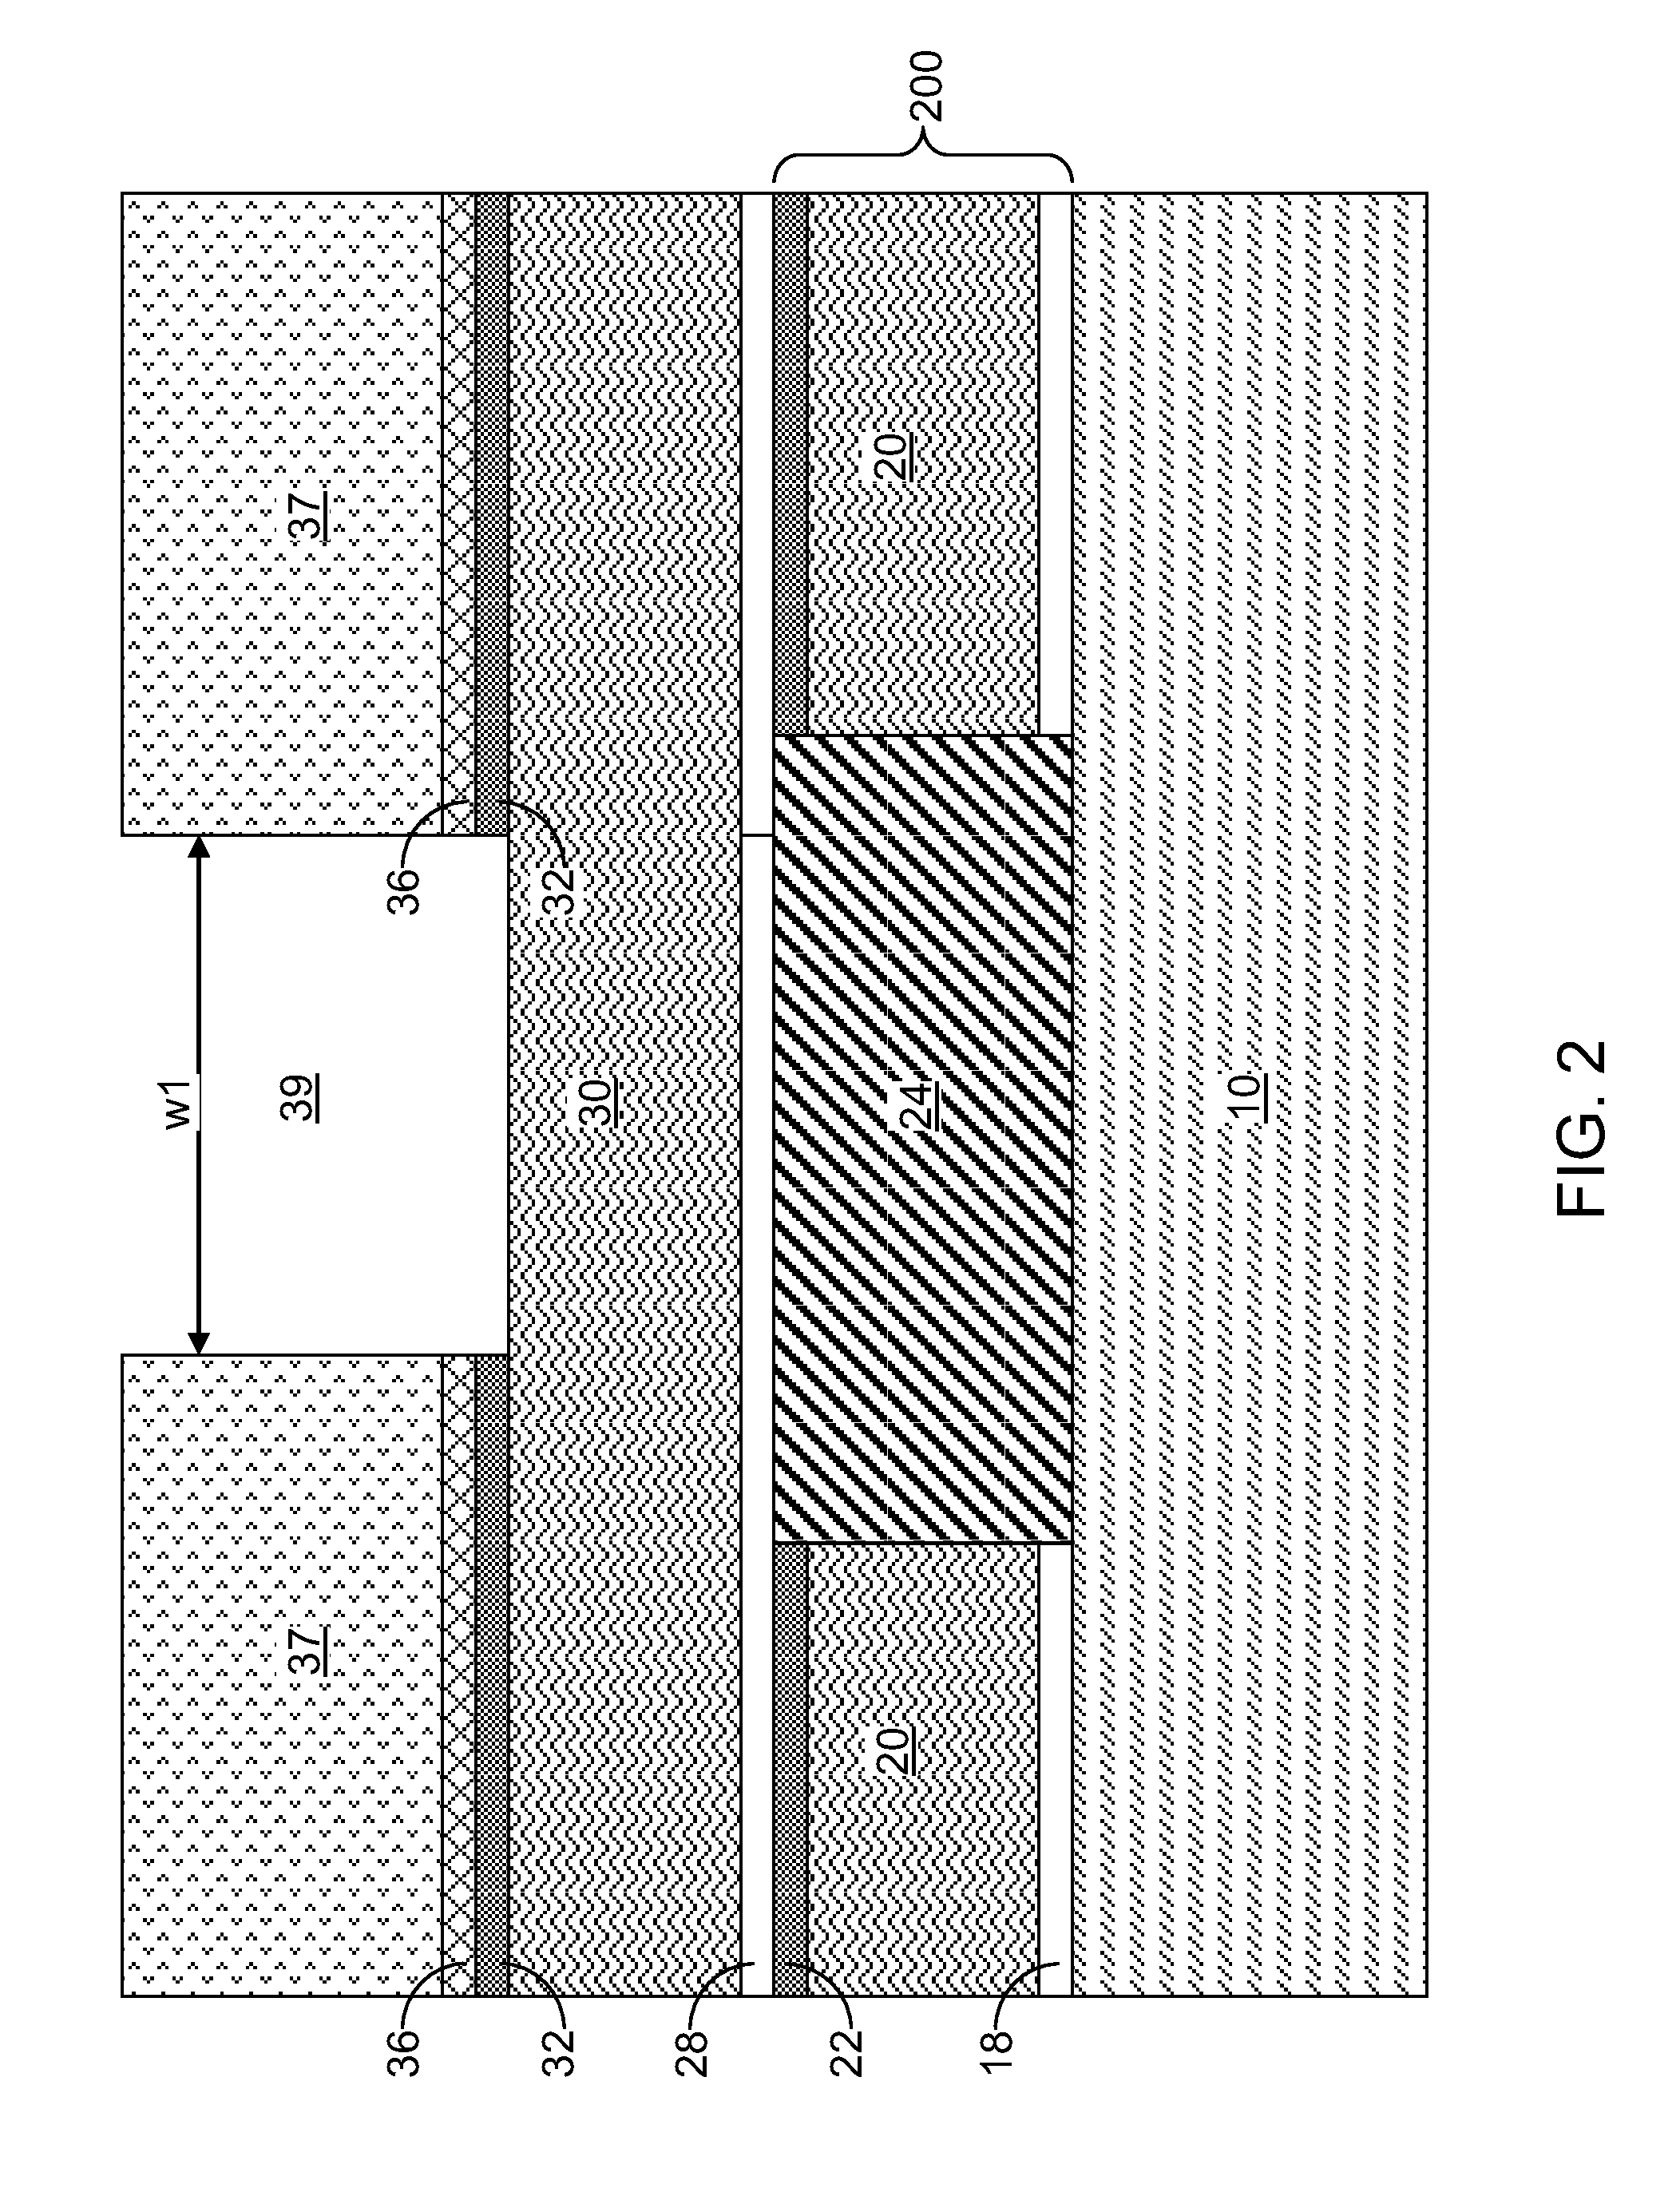 Low energy etch process for nitrogen-containing dielectric layer